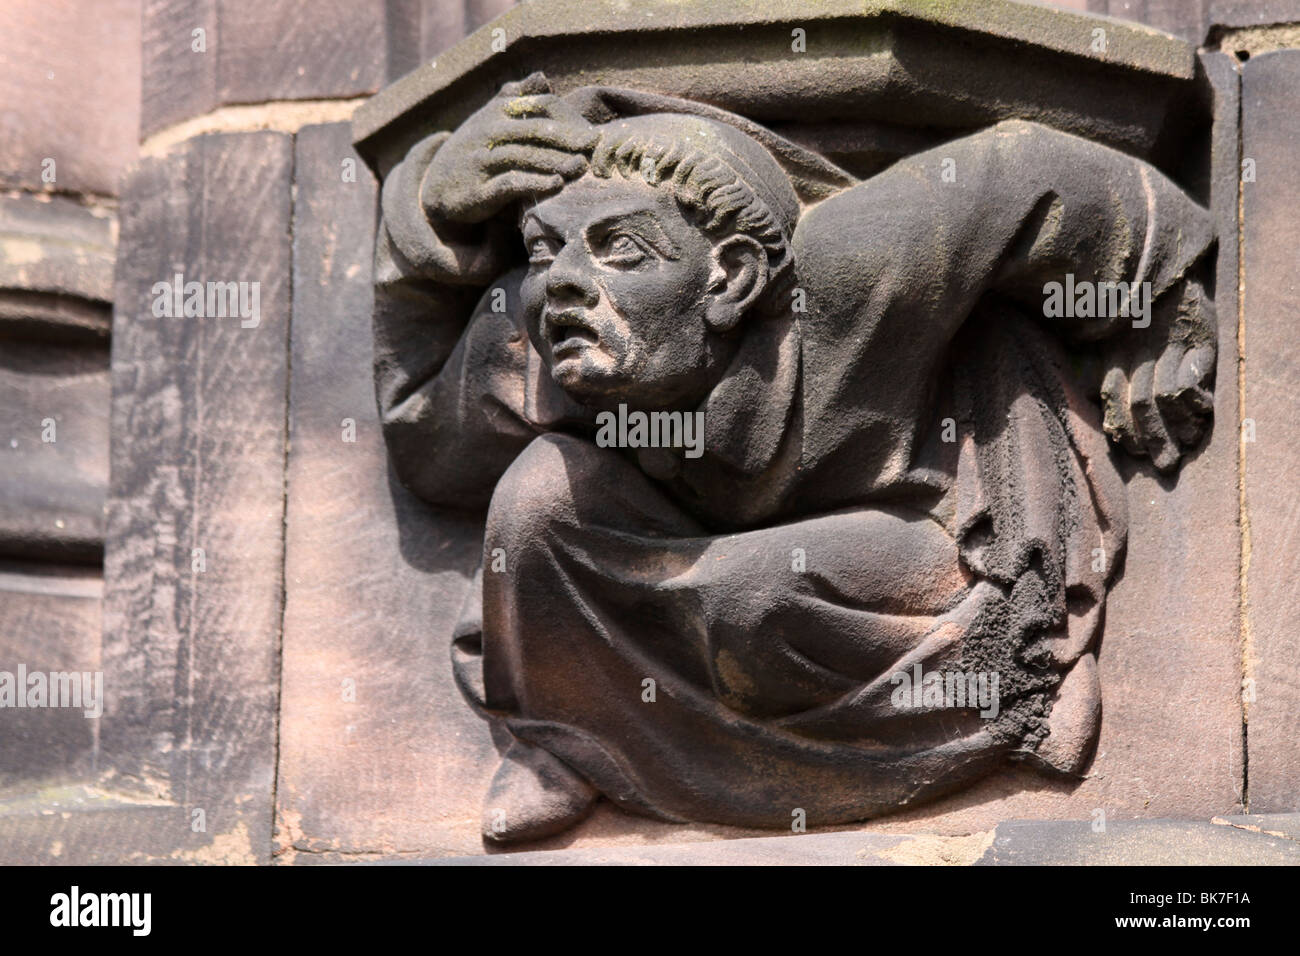 Monk Stone Carving At Chester Cathedral, Cheshire, UK Stock Photo